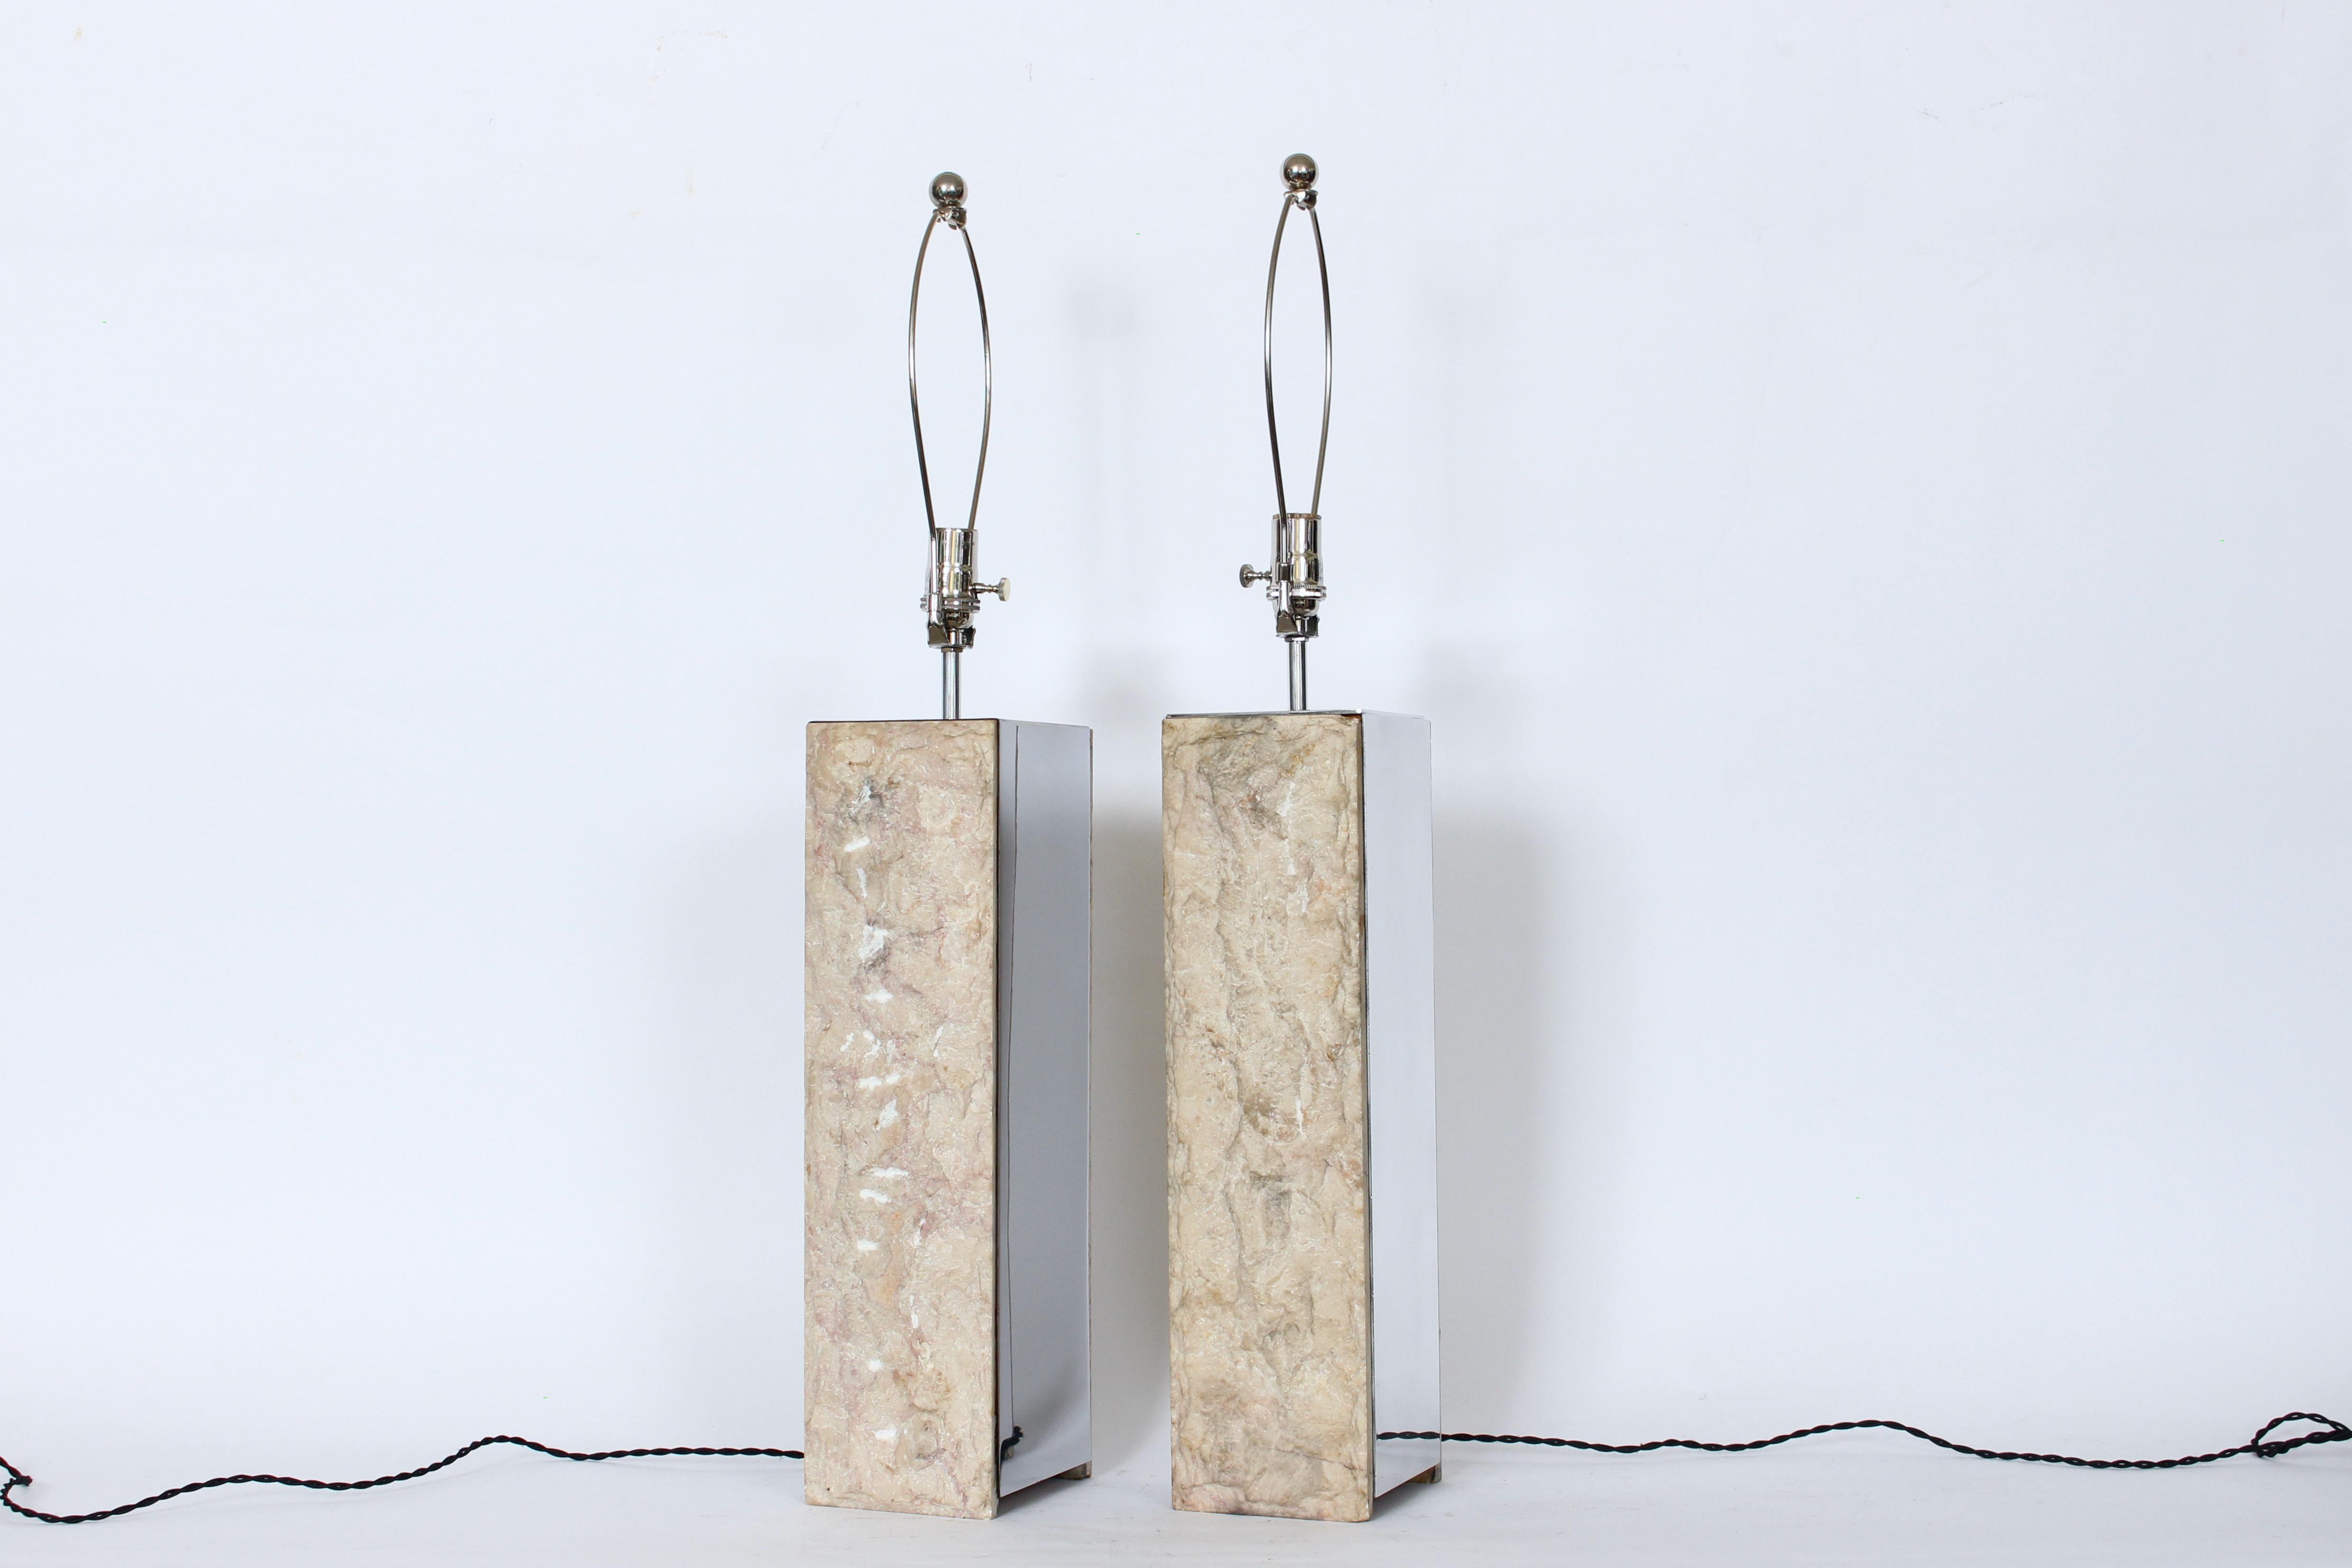 Substantial Pair of Laurel Italian Rough Cut Marble & Polished Metal Table Lamps In Good Condition For Sale In Bainbridge, NY